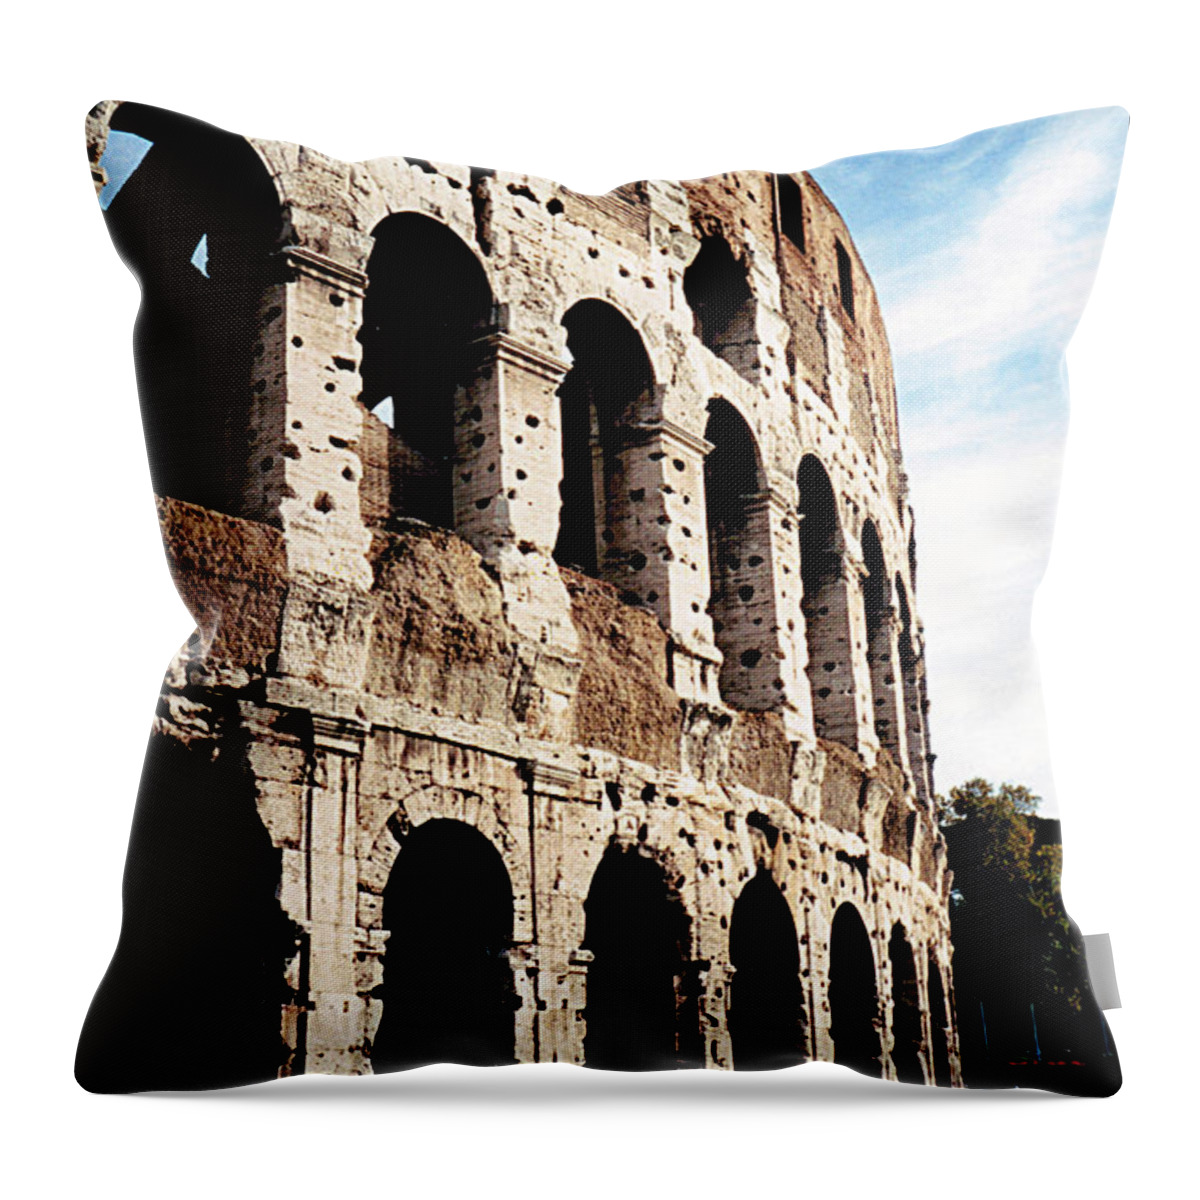 Colosseum Throw Pillow featuring the photograph The Colosseum by Donna Proctor